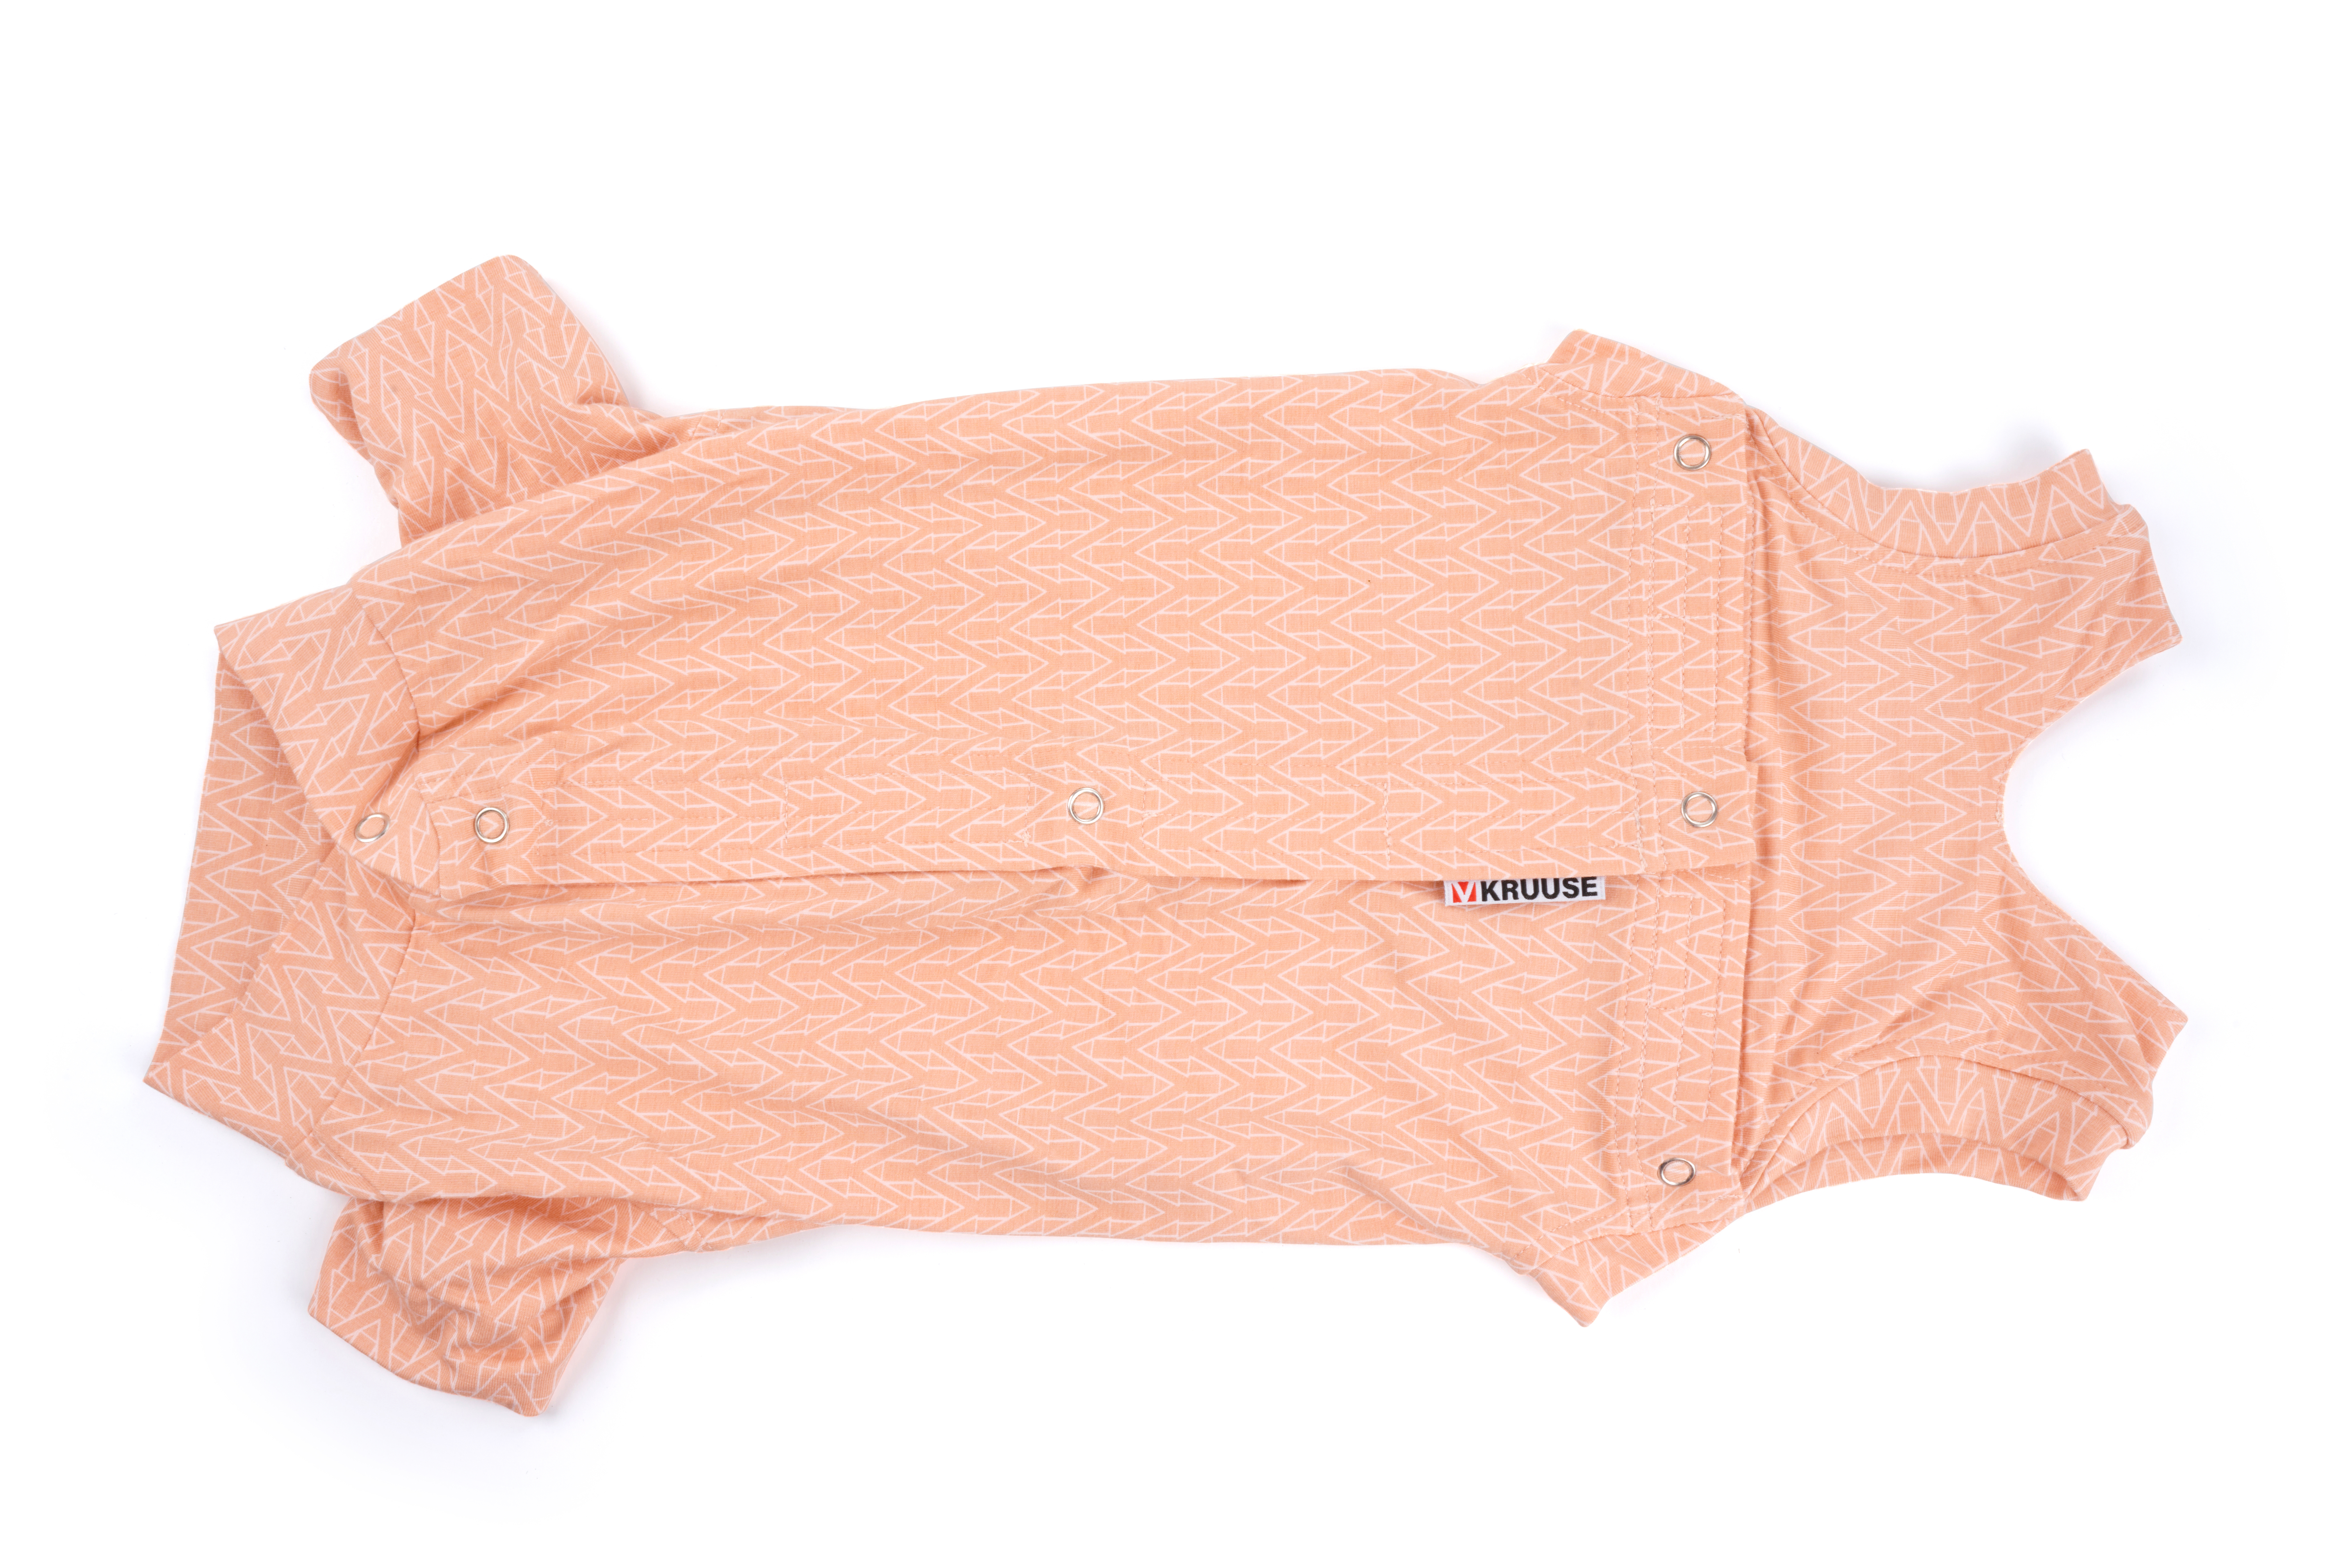 BUSTER Body Suit Step´n Go For Dogs, XS, Peachy Orange
